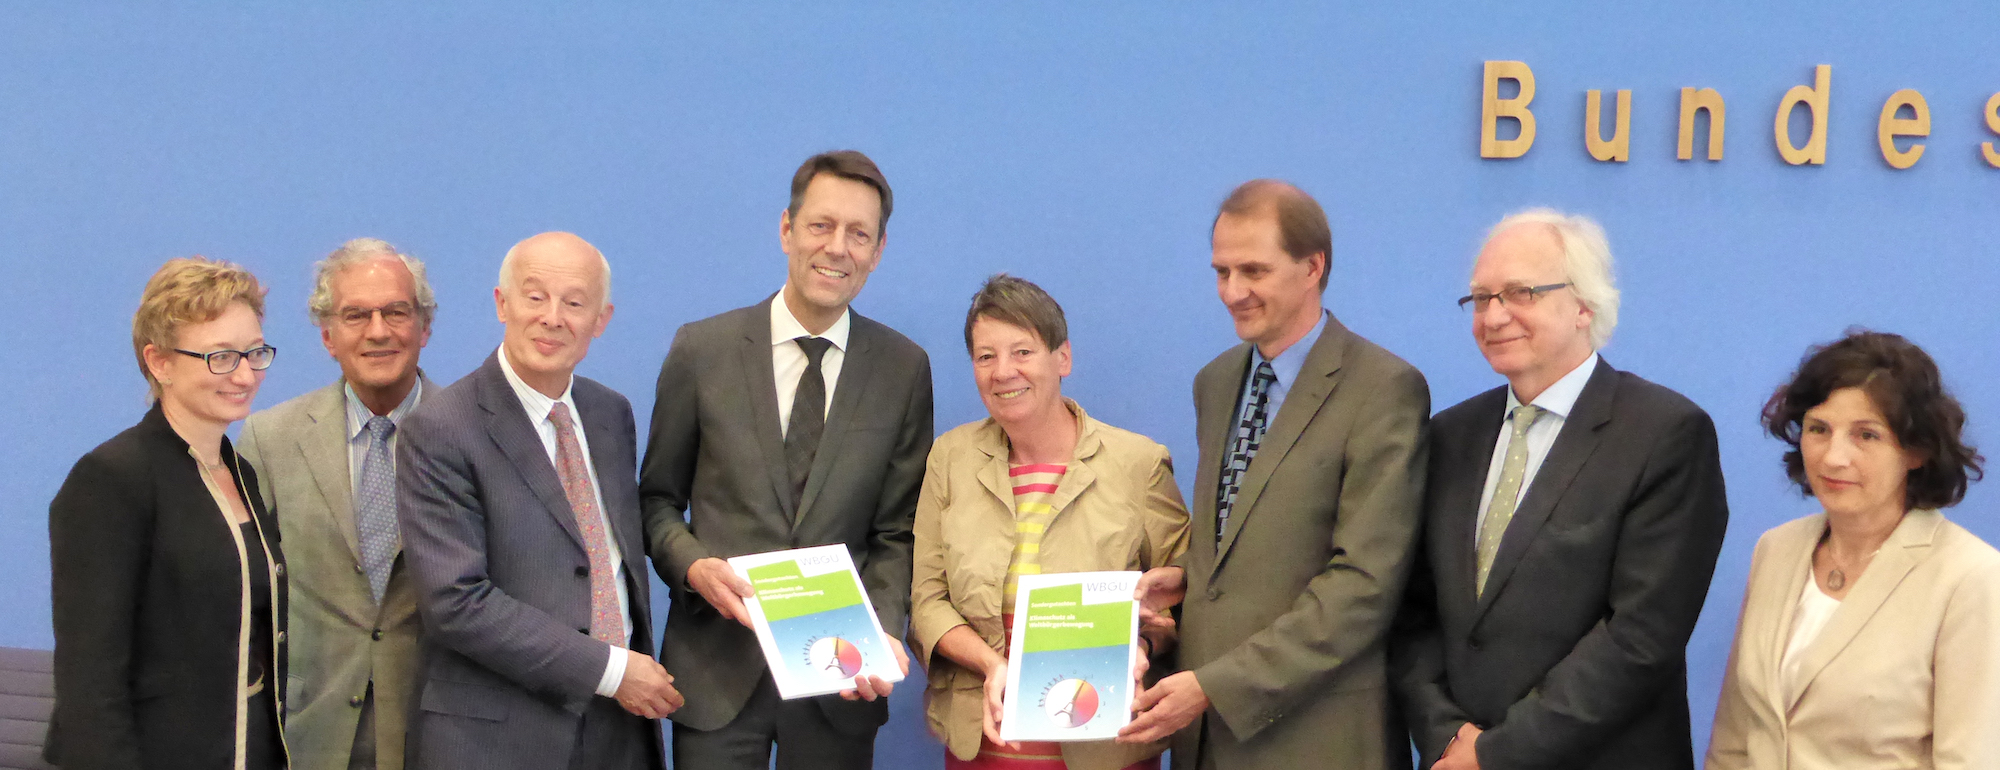 Presentation of the report "Climate Protection as a World Citizen Movement" to the Federal Government